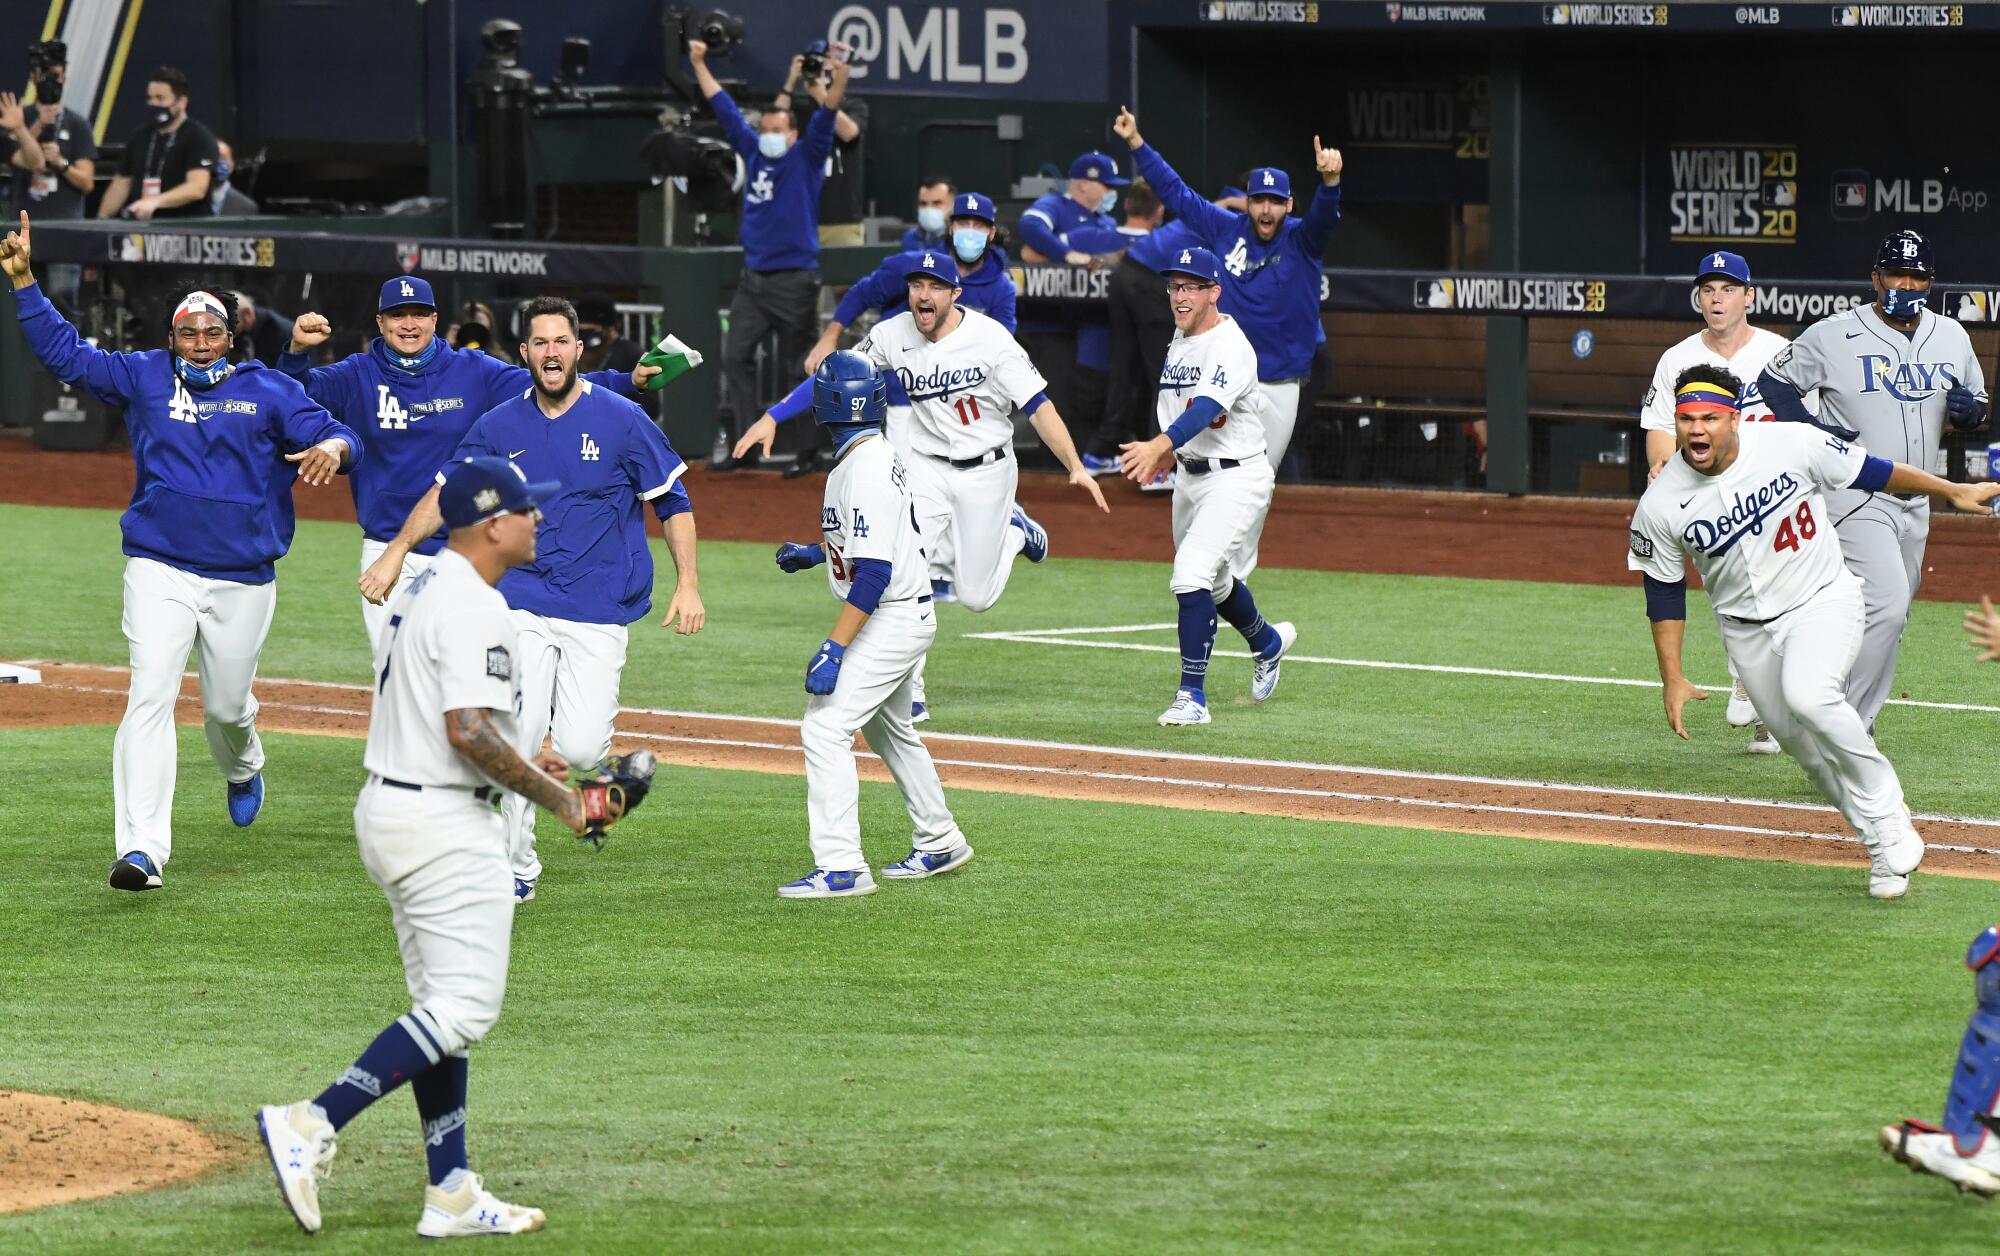 Dodgers players run toward pitcher Julio Urías after the final out of the World Series.